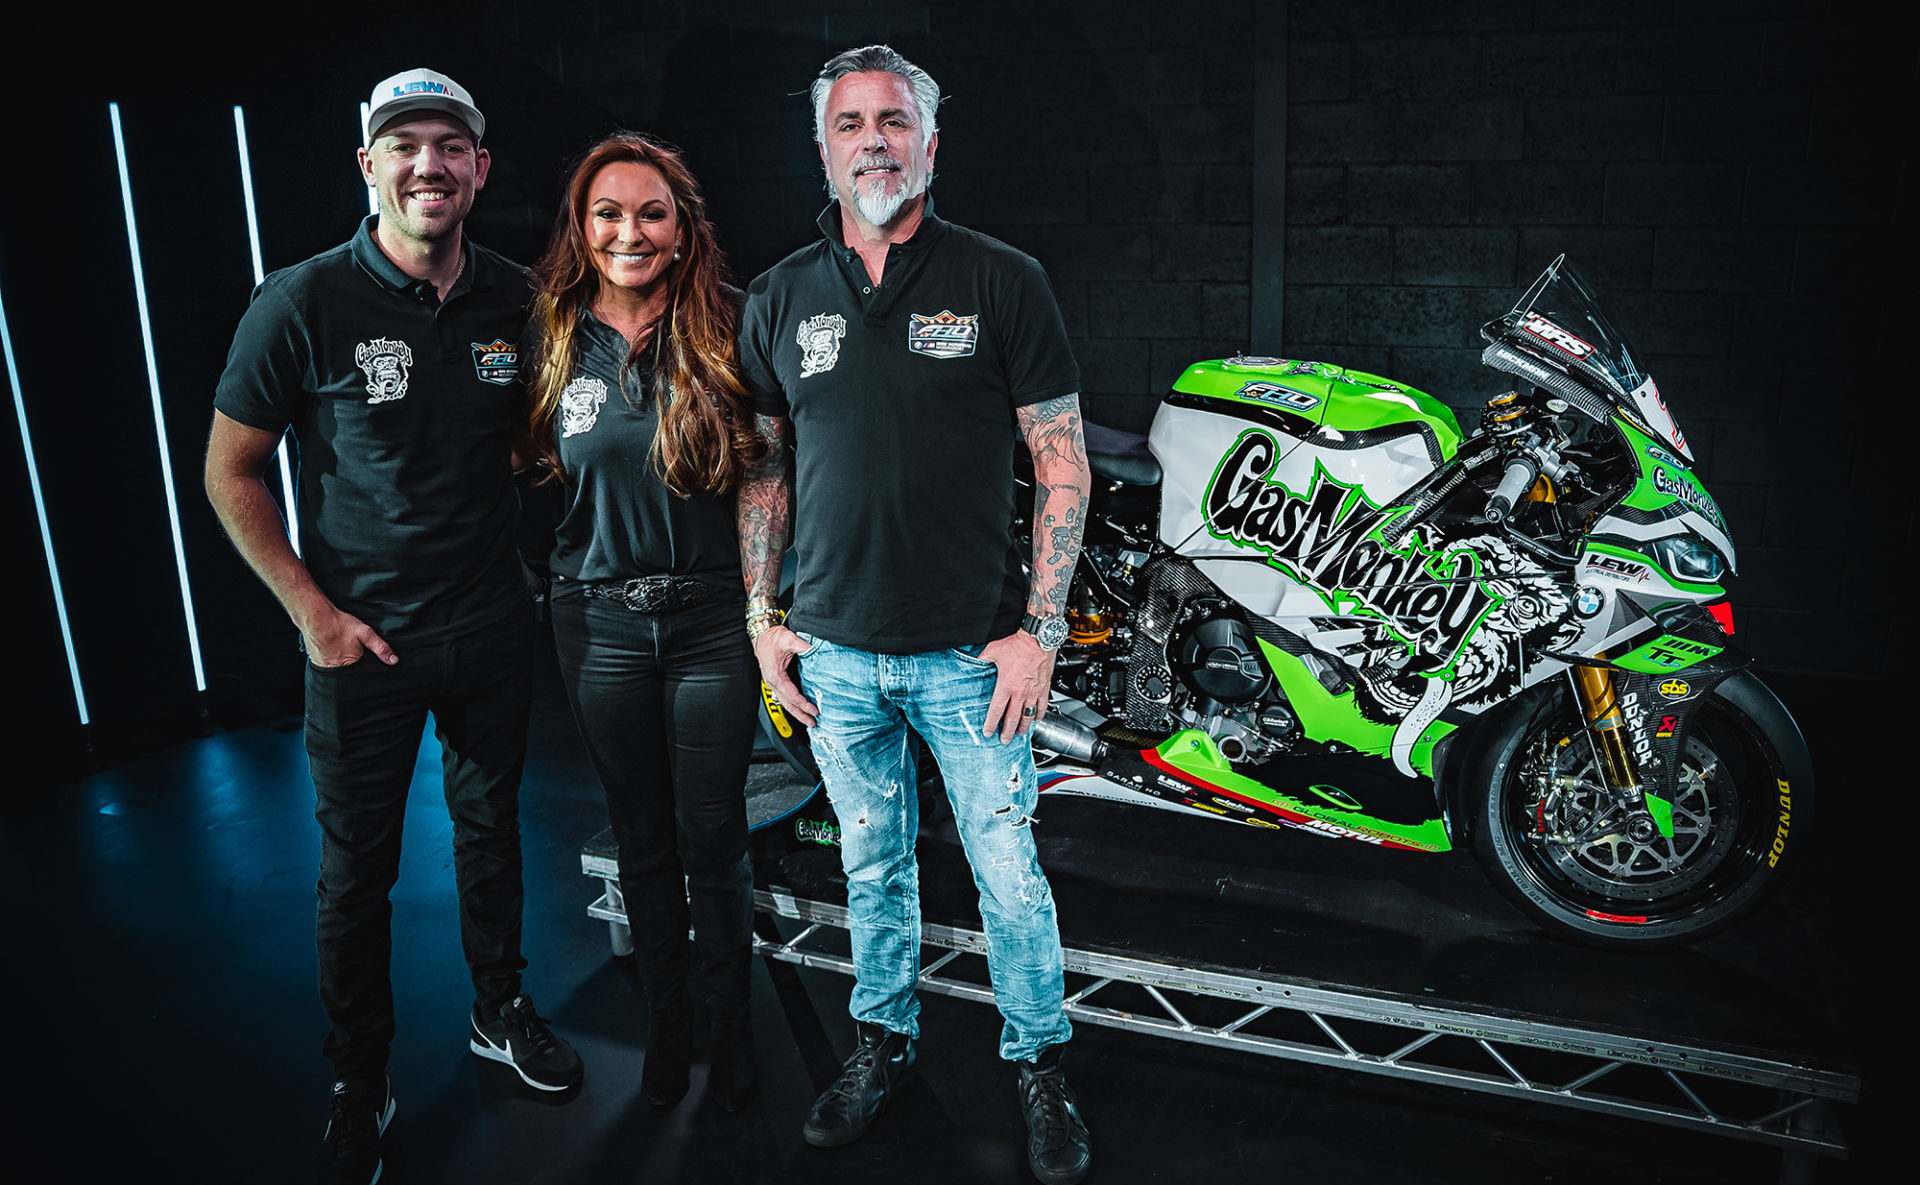 Peter Hickman (left), FHO Racing Team Owner Faye Ho (center), and Gas Monkey Garage's Richard Rawlings (right). Photo courtesy FHO Racing.